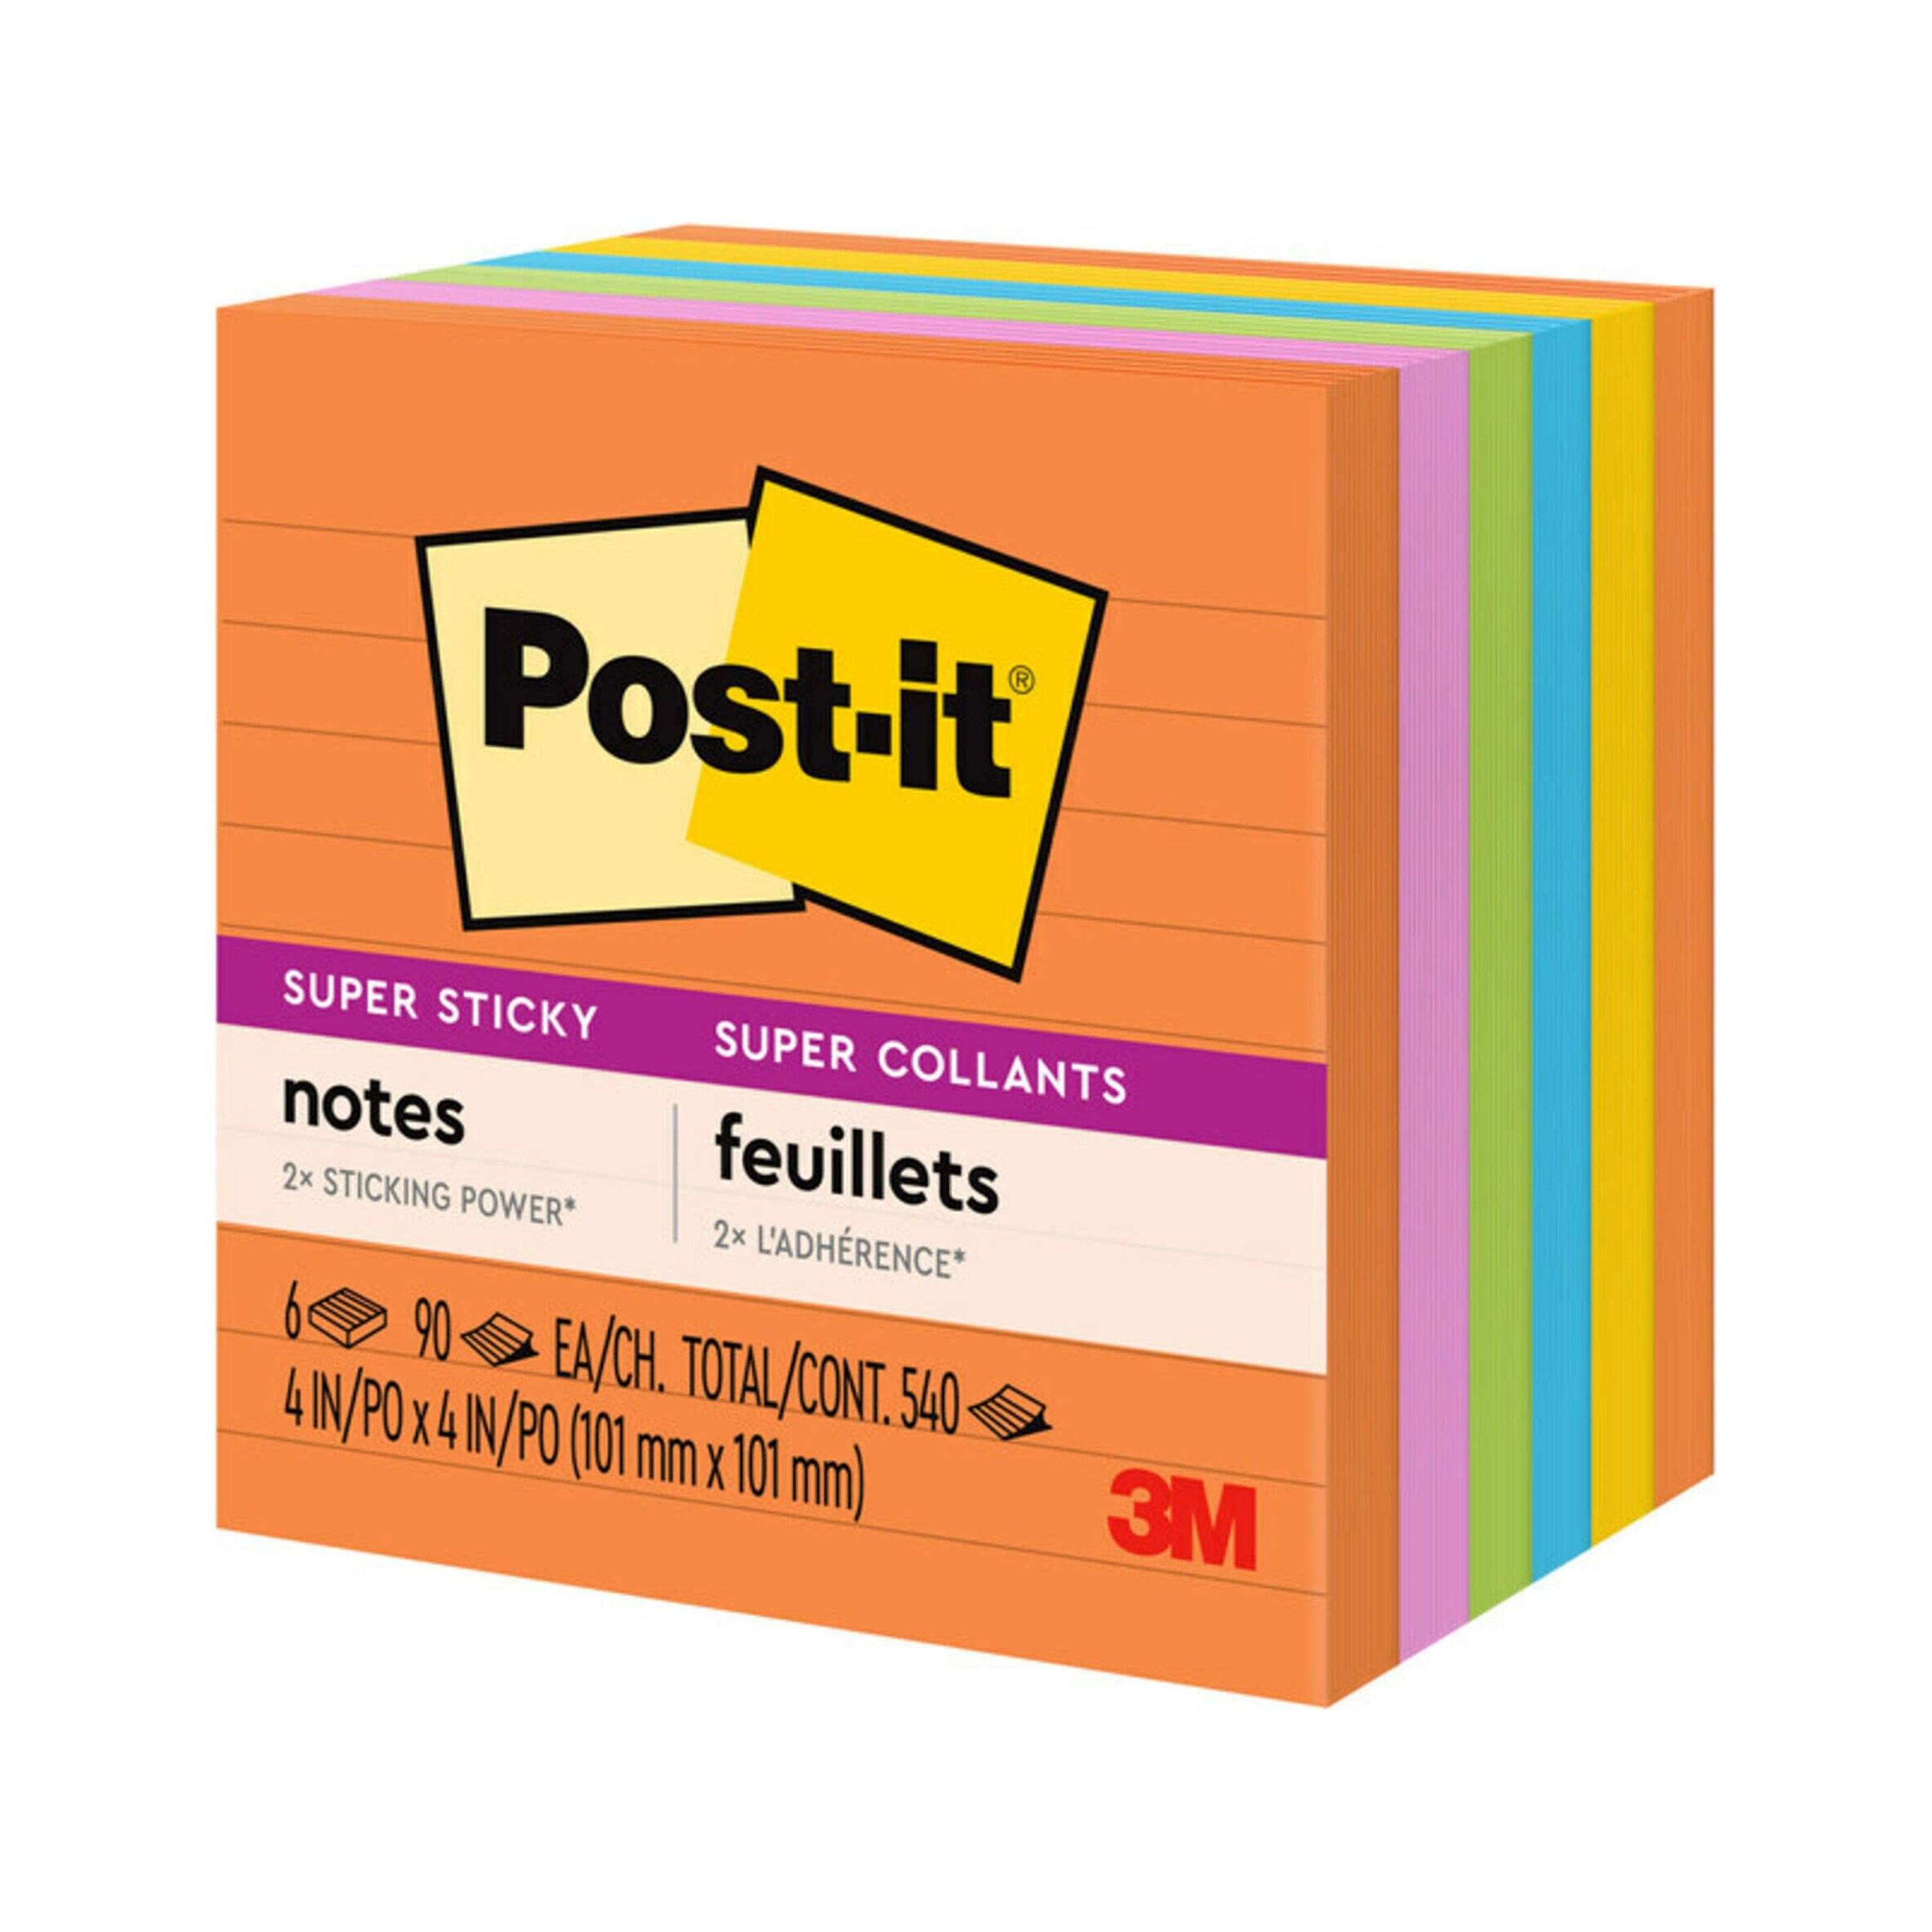 Post-it Made a Stronger Version of the Sticky Note. We Put Them to